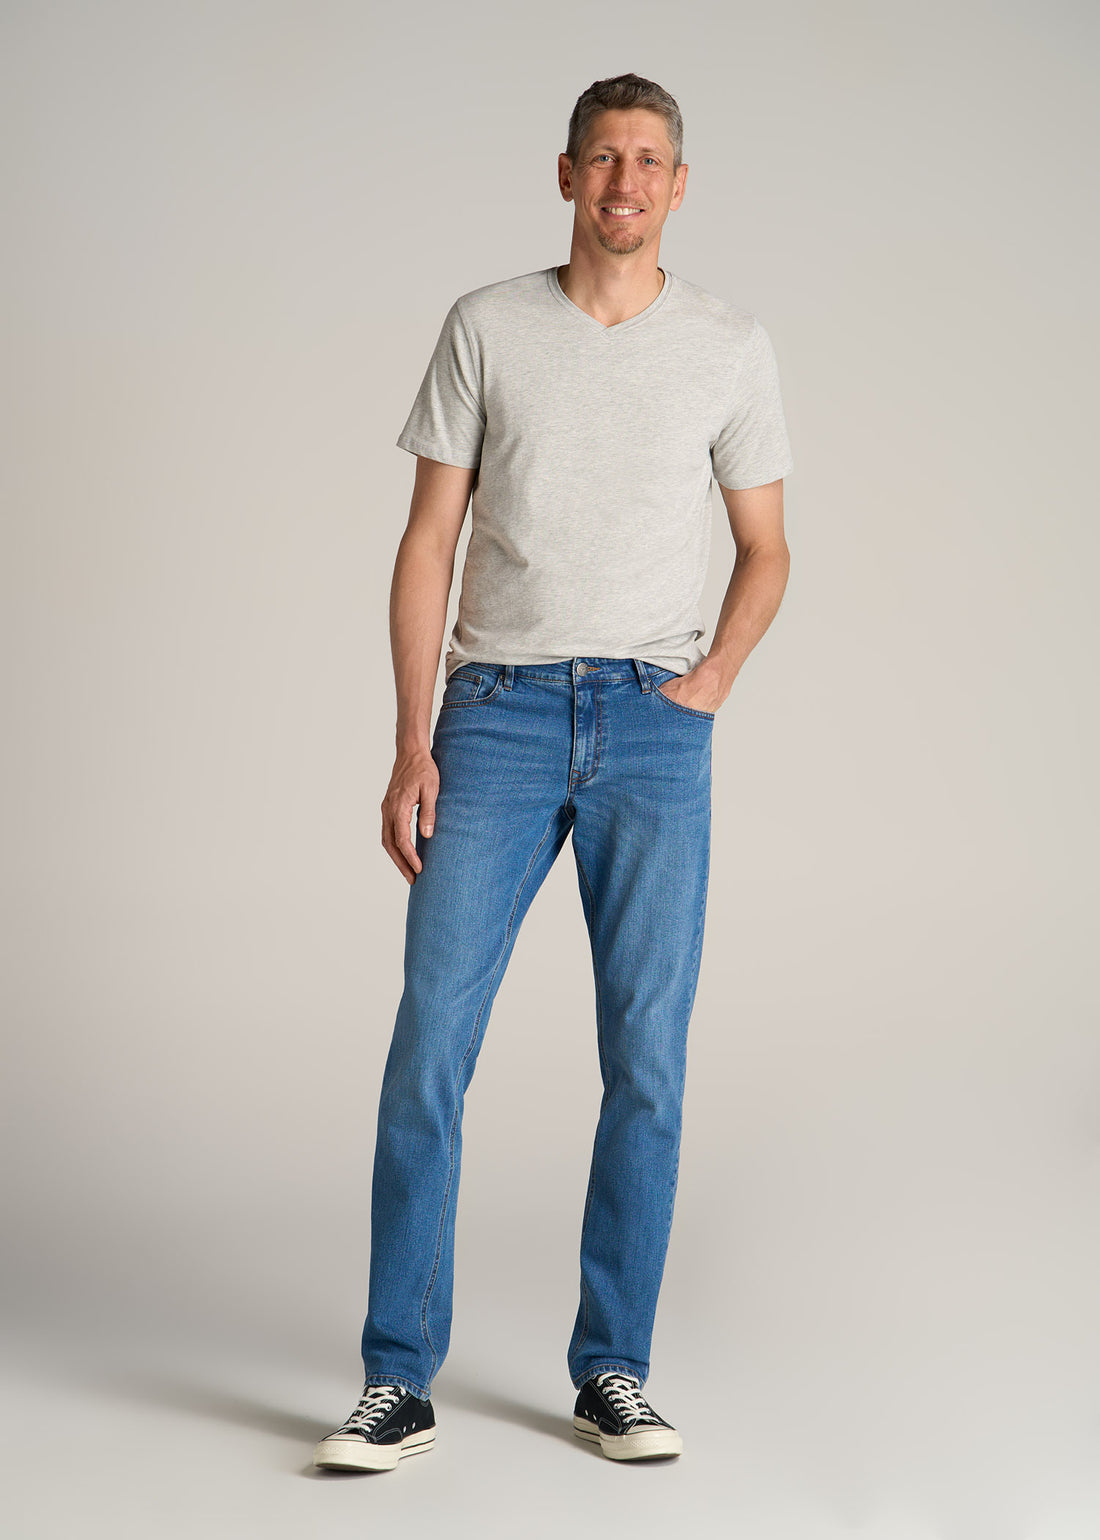 A tall man wearing American Tall's Essential REGULAR-FIT V-Neck Men's Tall Tees in the color Grey Mix.